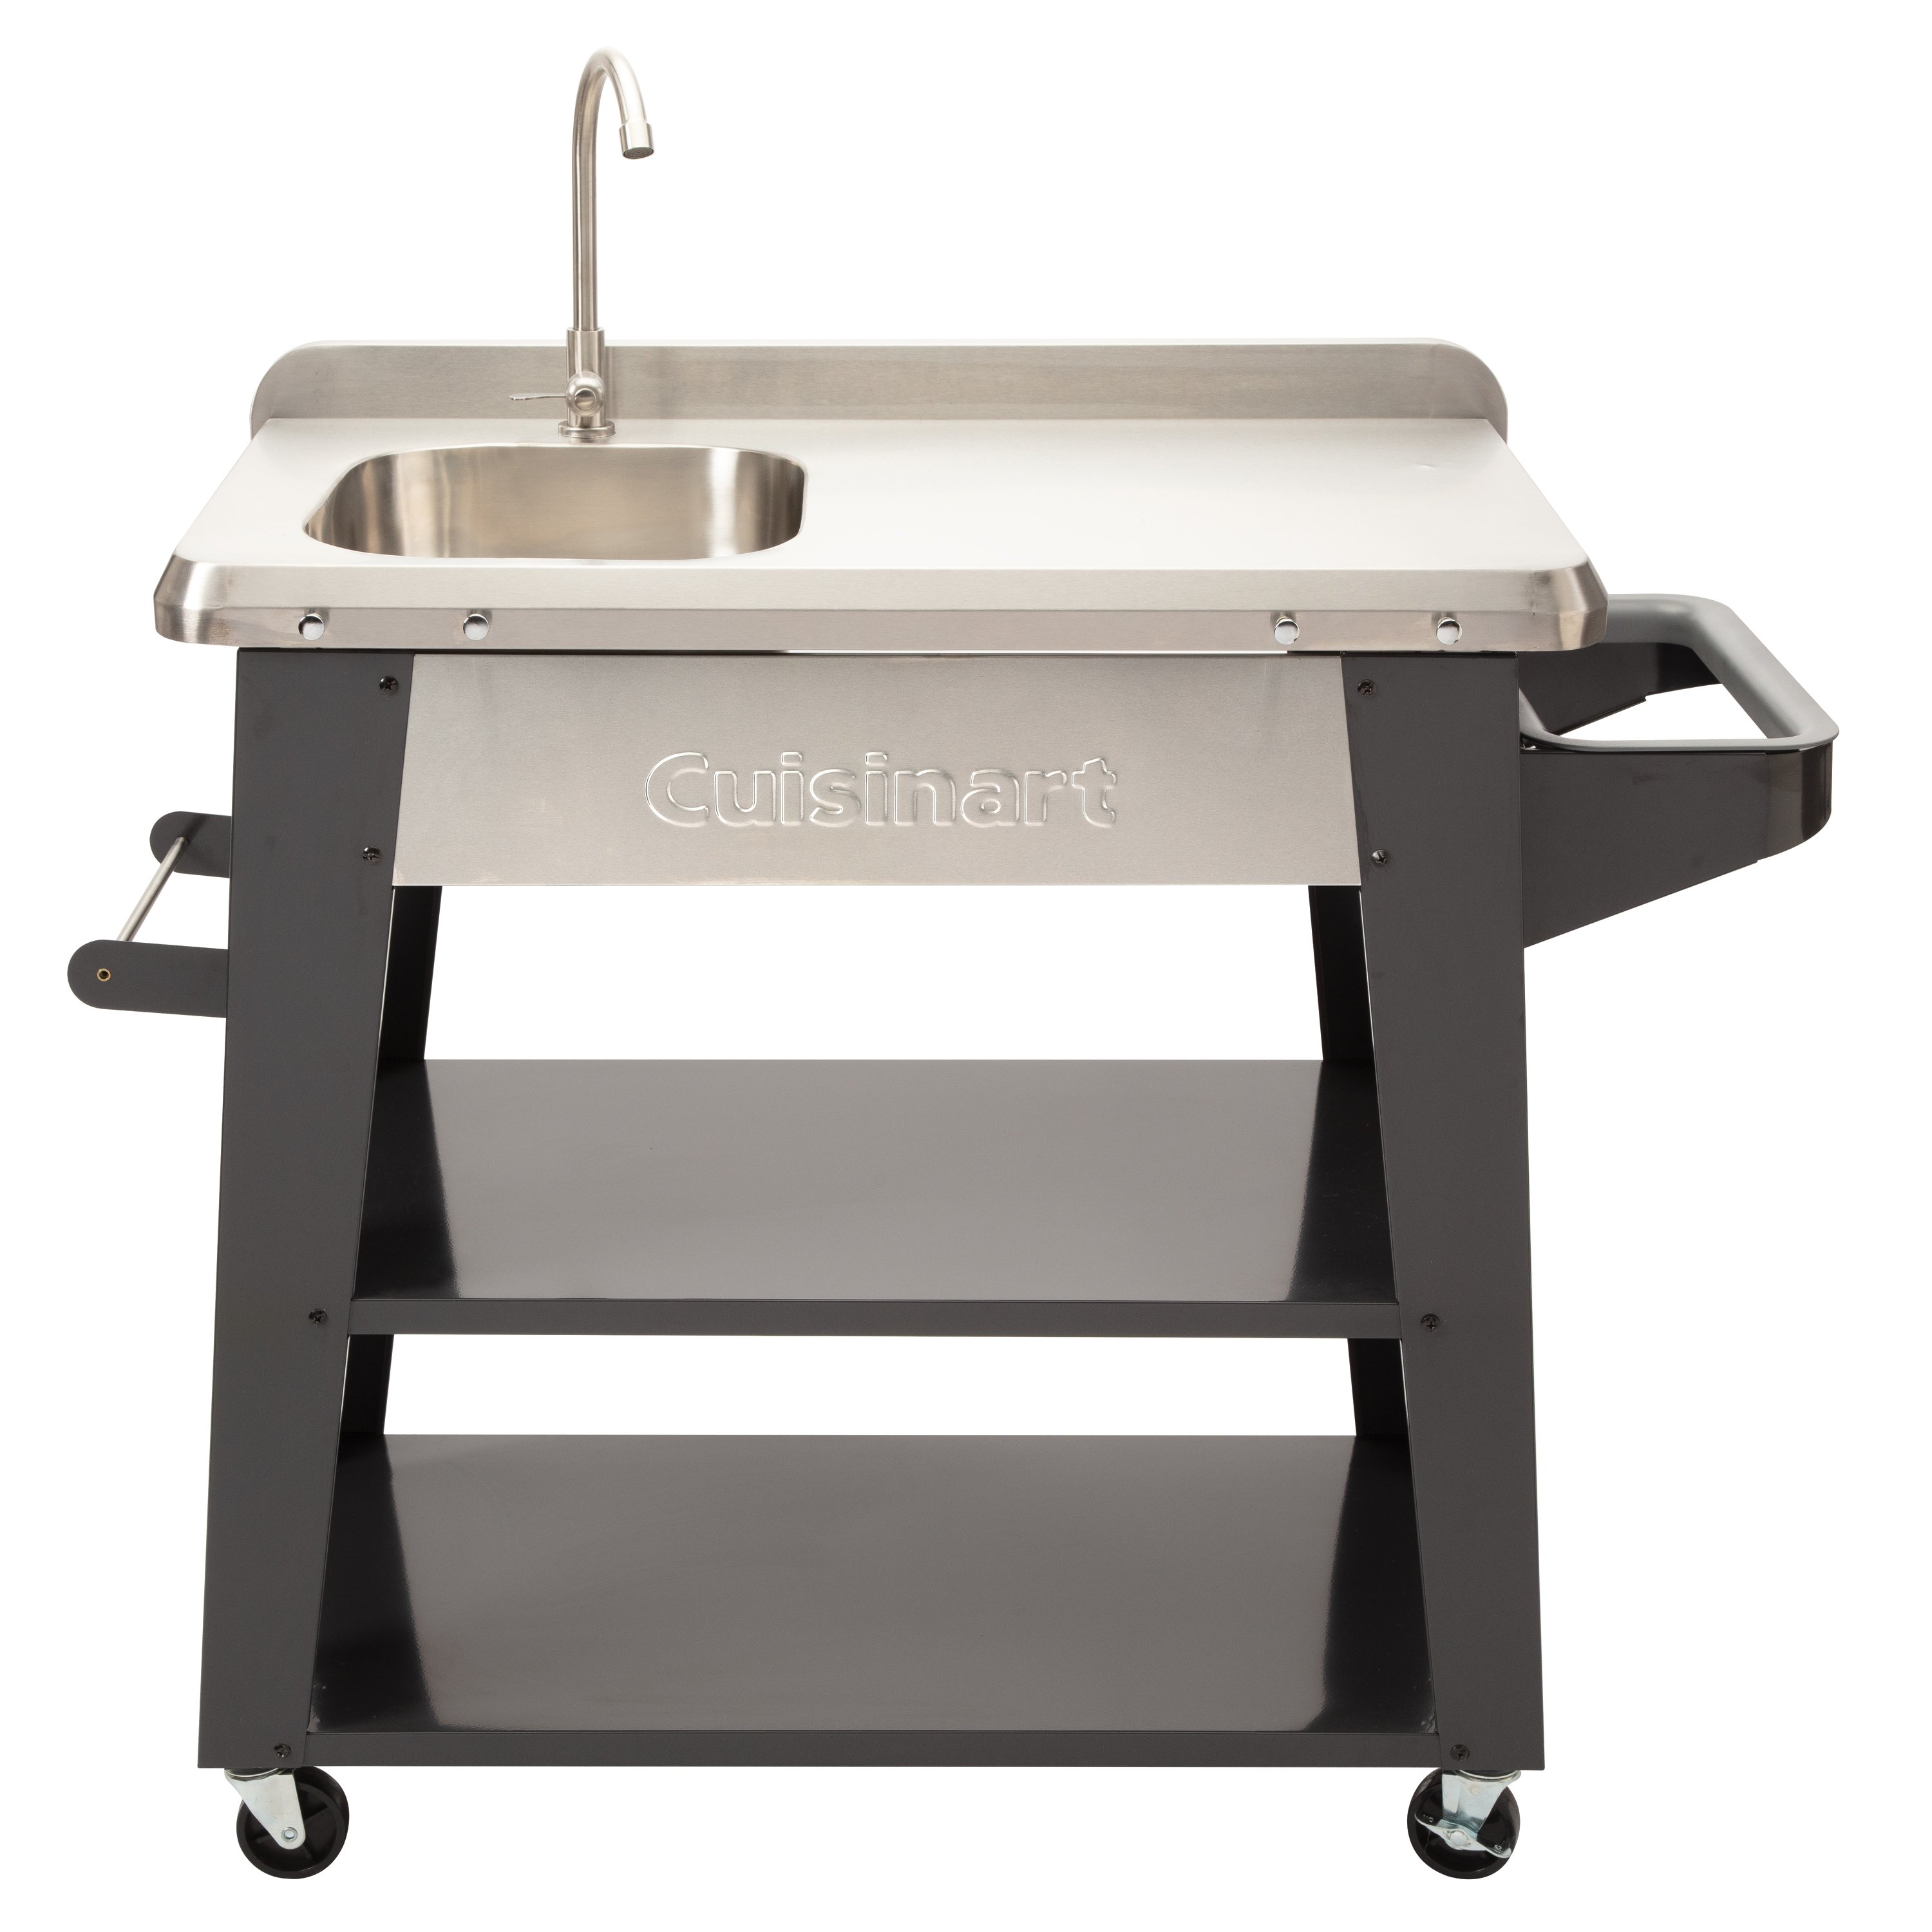 Deluxe Outdoor Prep Table Cuisinart Com, Outdoor Table With Sink